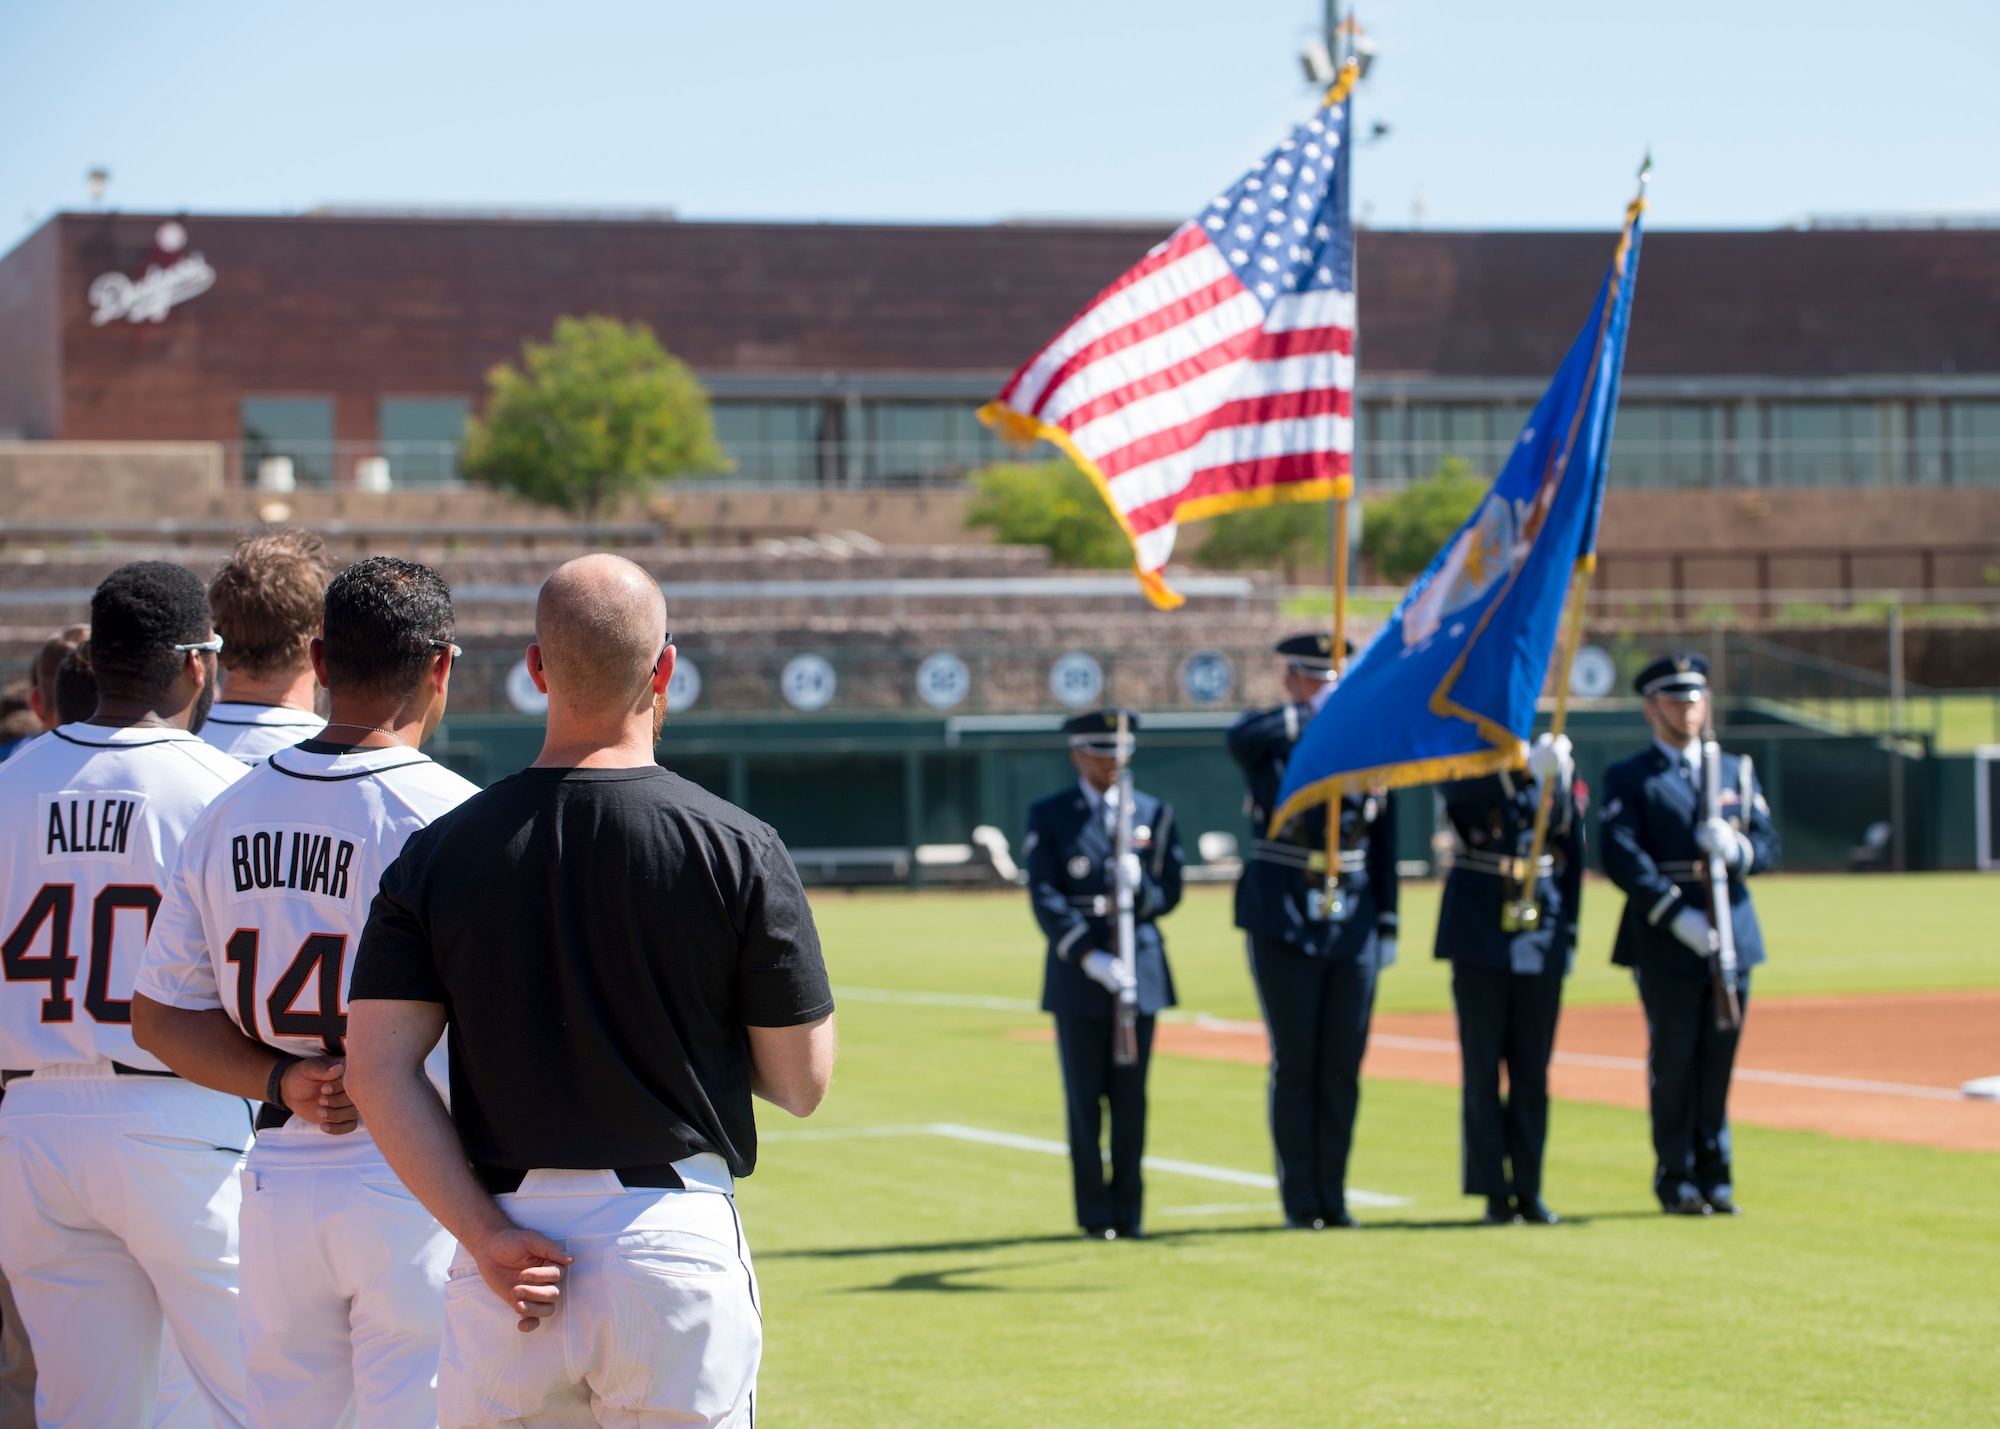 The Glendale Javelinas show respect to the U.S. flag as the Luke Air Force Base Honor Guard post the colors during the National Anthem at a Major League Baseball Arizona Fall League military appreciation game Oct. 6, 2019, at Camelback Ranch stadium in Phoenix.